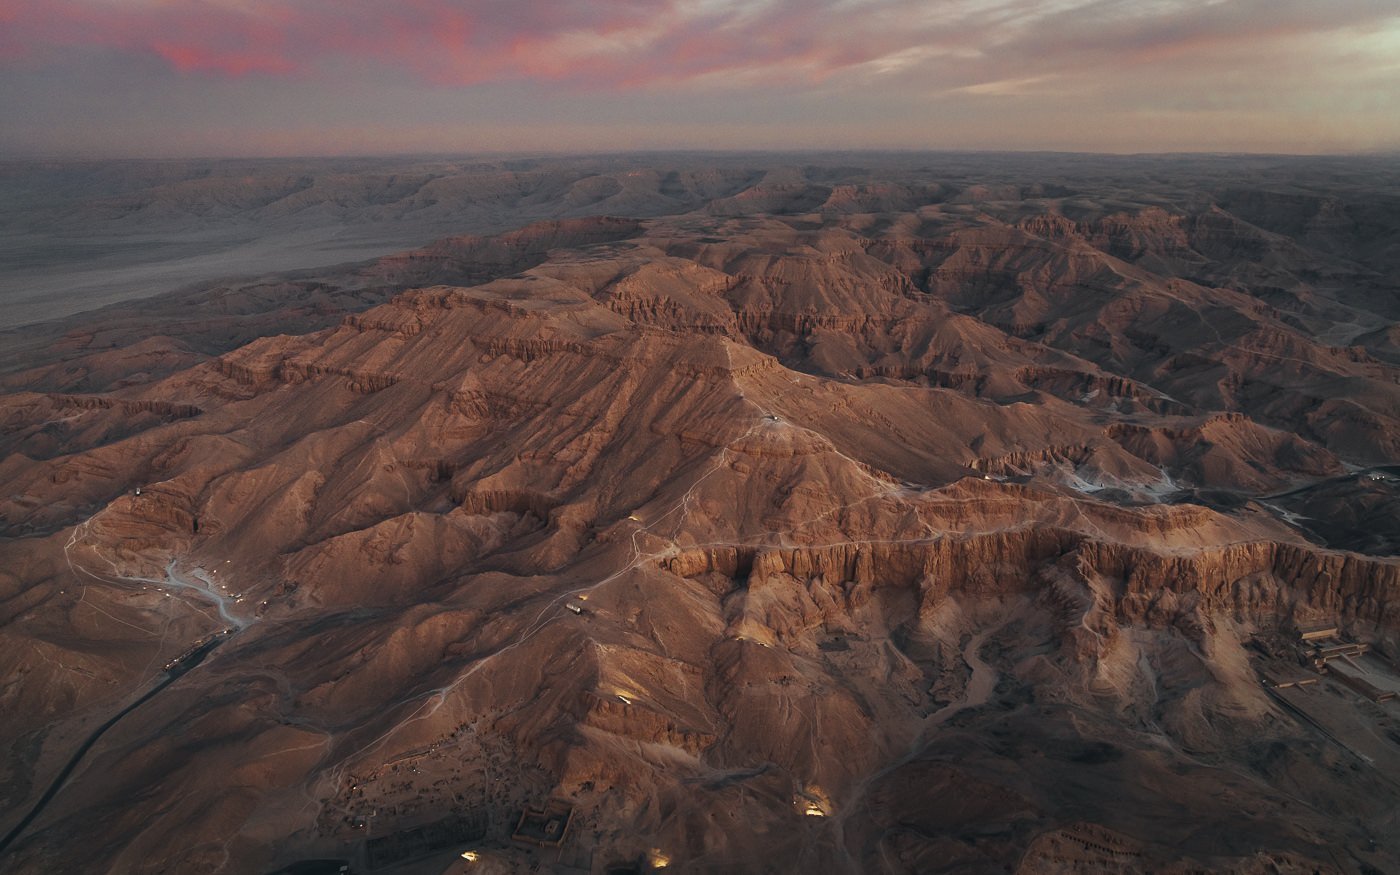 Valley of the Kings in Egypt